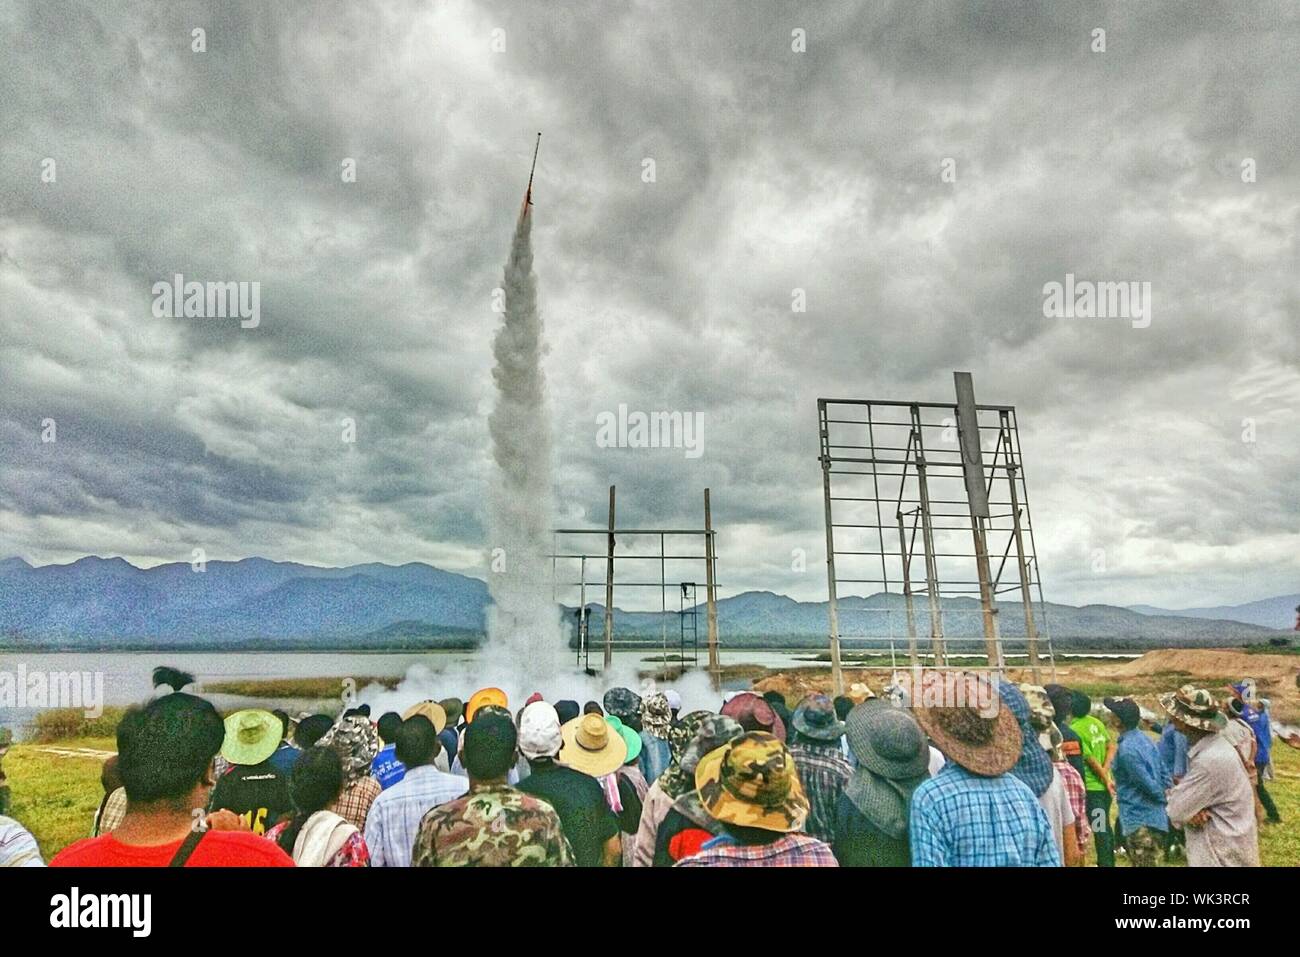 Crowd Looking At Rocket Launch At Riverbank Against Cloudy Sky Stock Photo